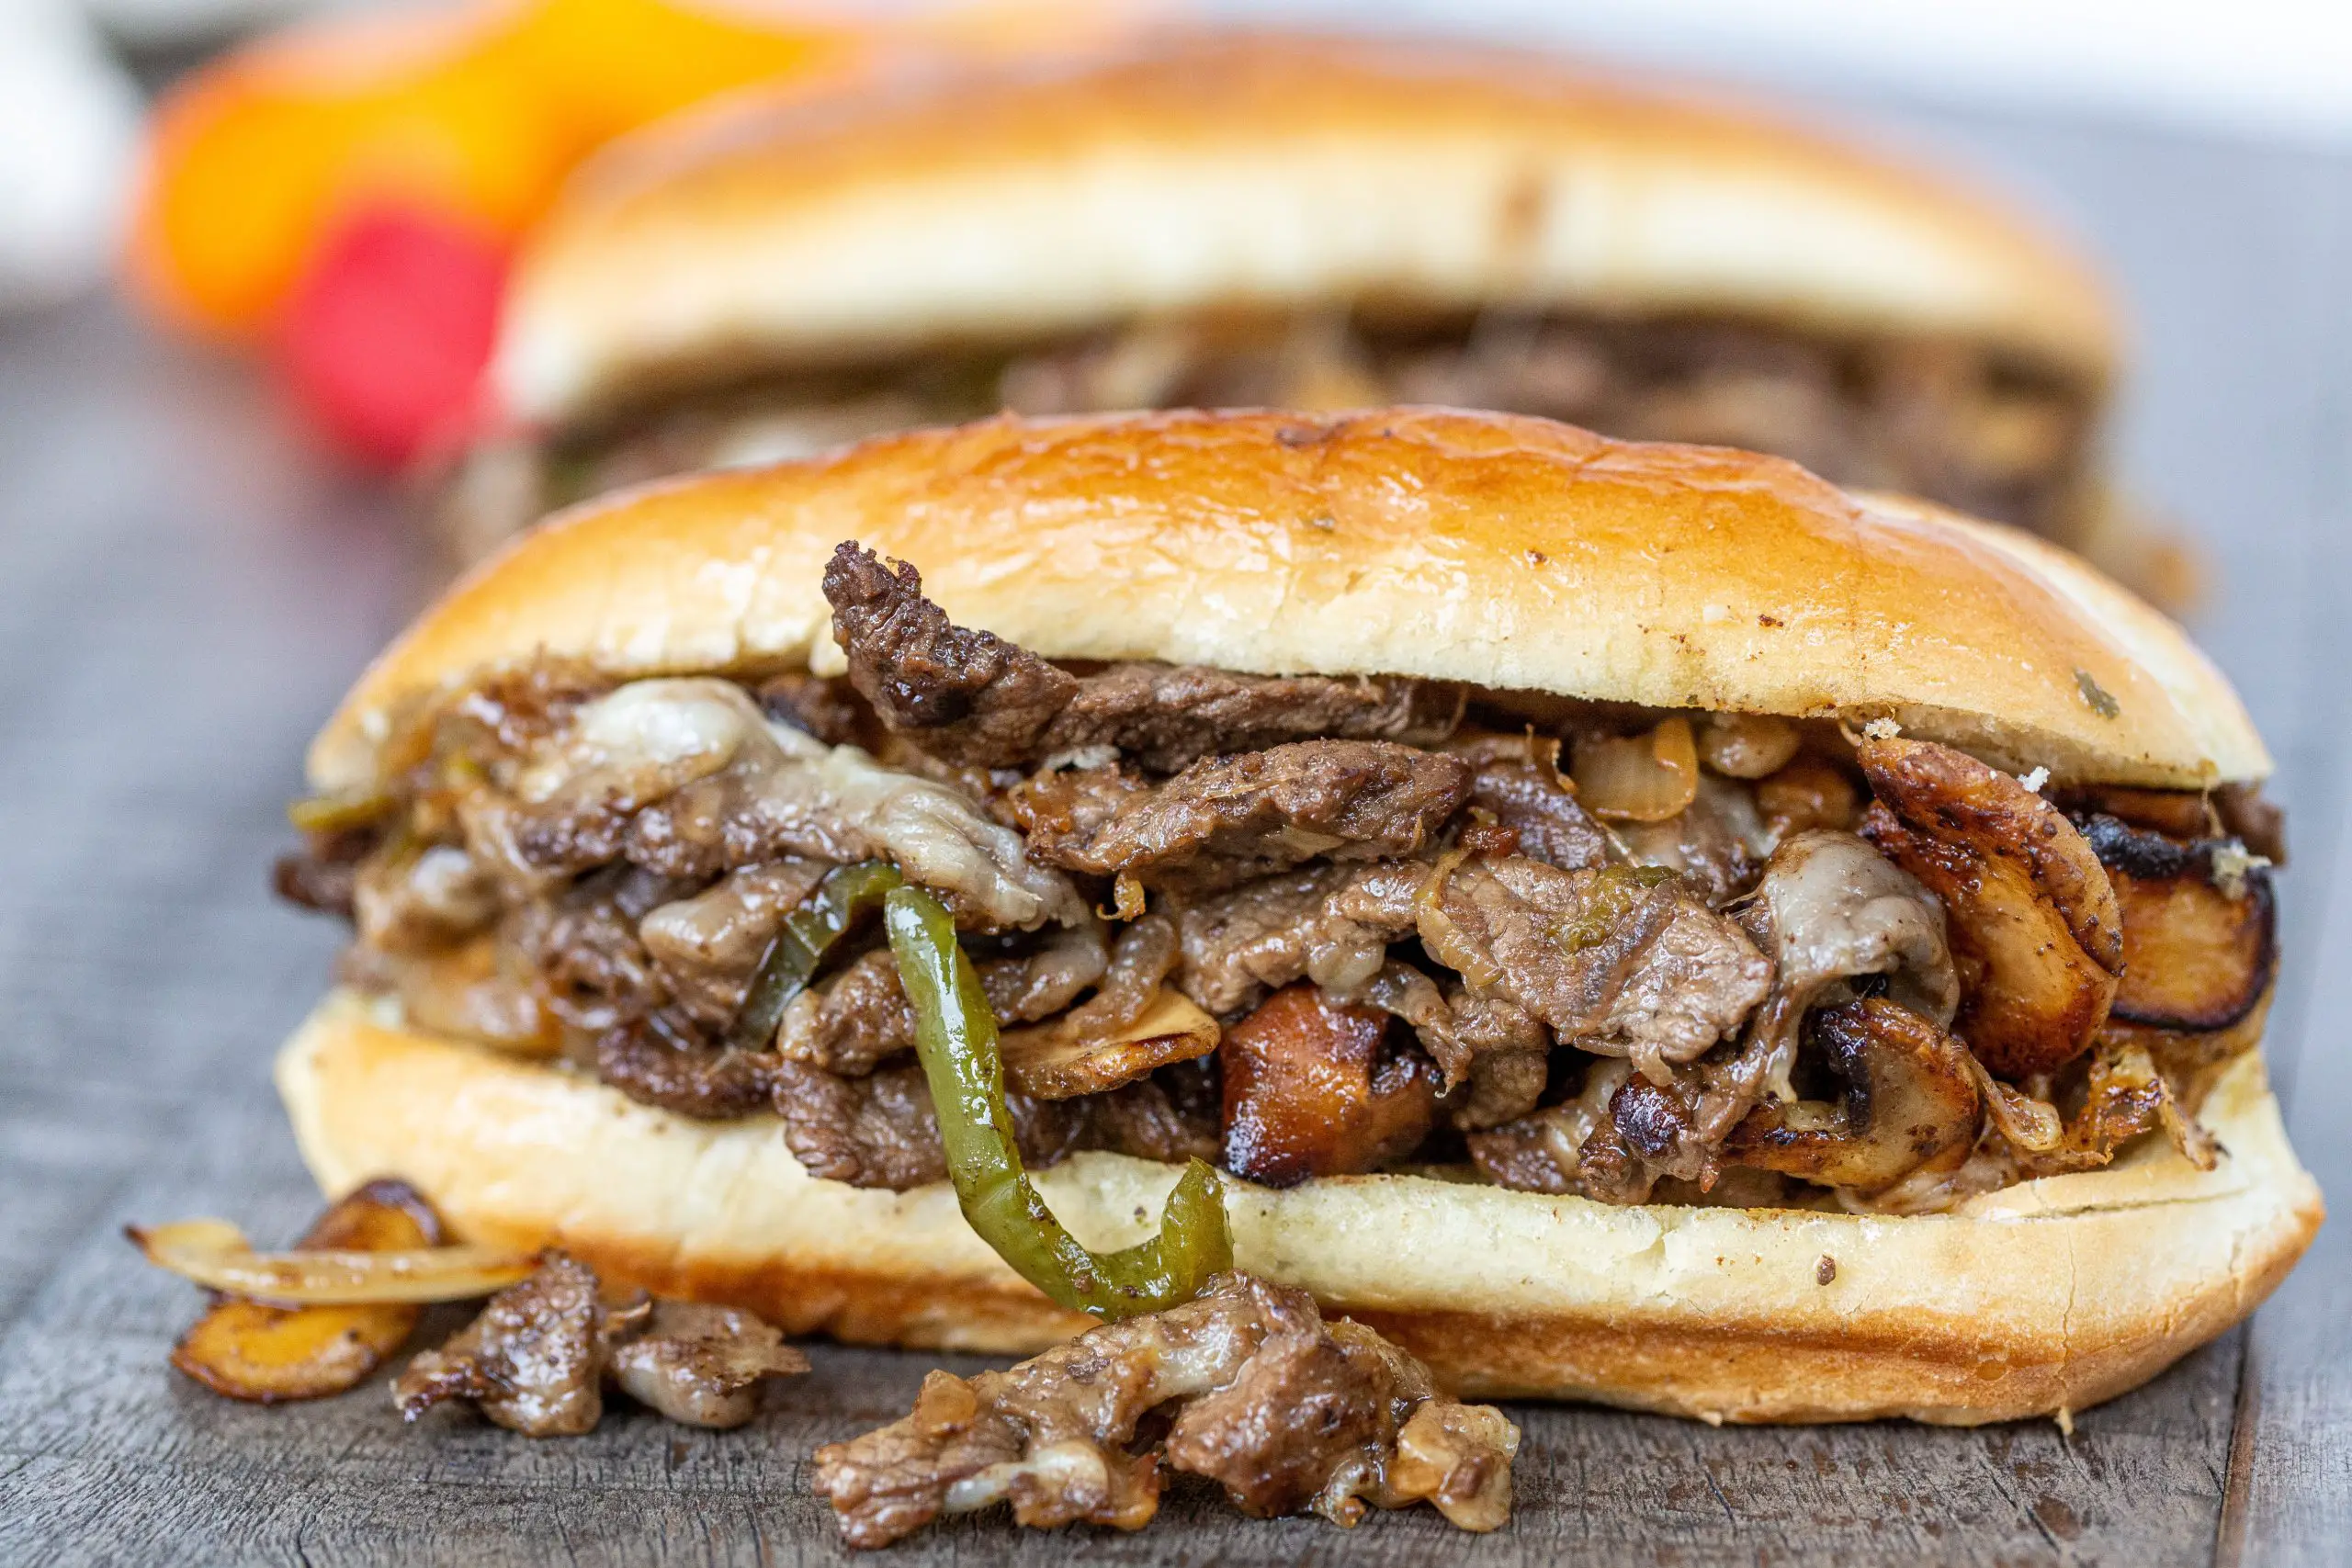 Easy Philly Cheesesteak Recipe (Ultimate Guide)